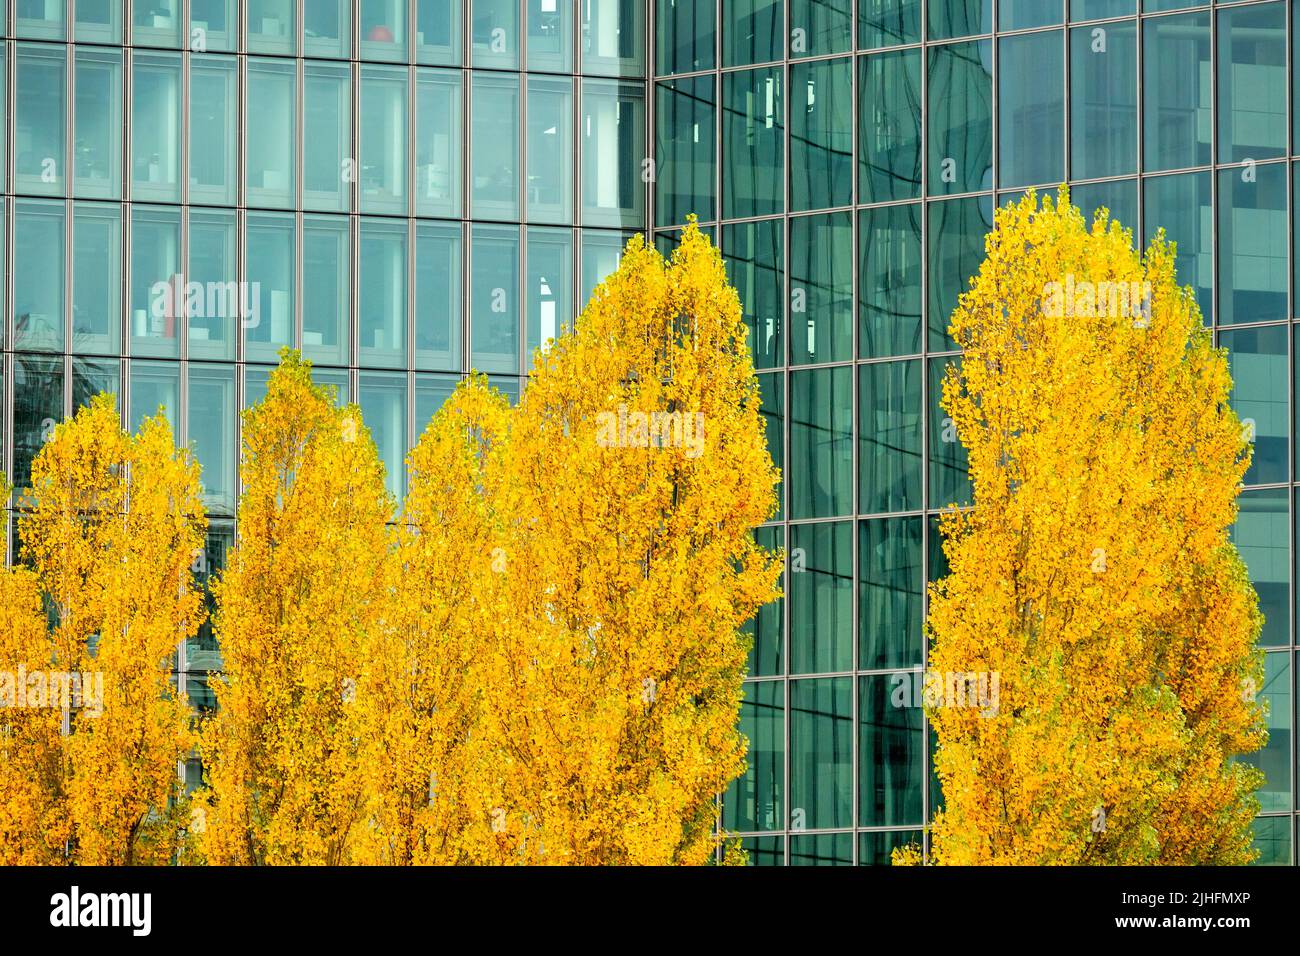 Yellow trees in autumn near the Seat of the European Central Bank, Frankfurt am Main, Germany Stock Photo